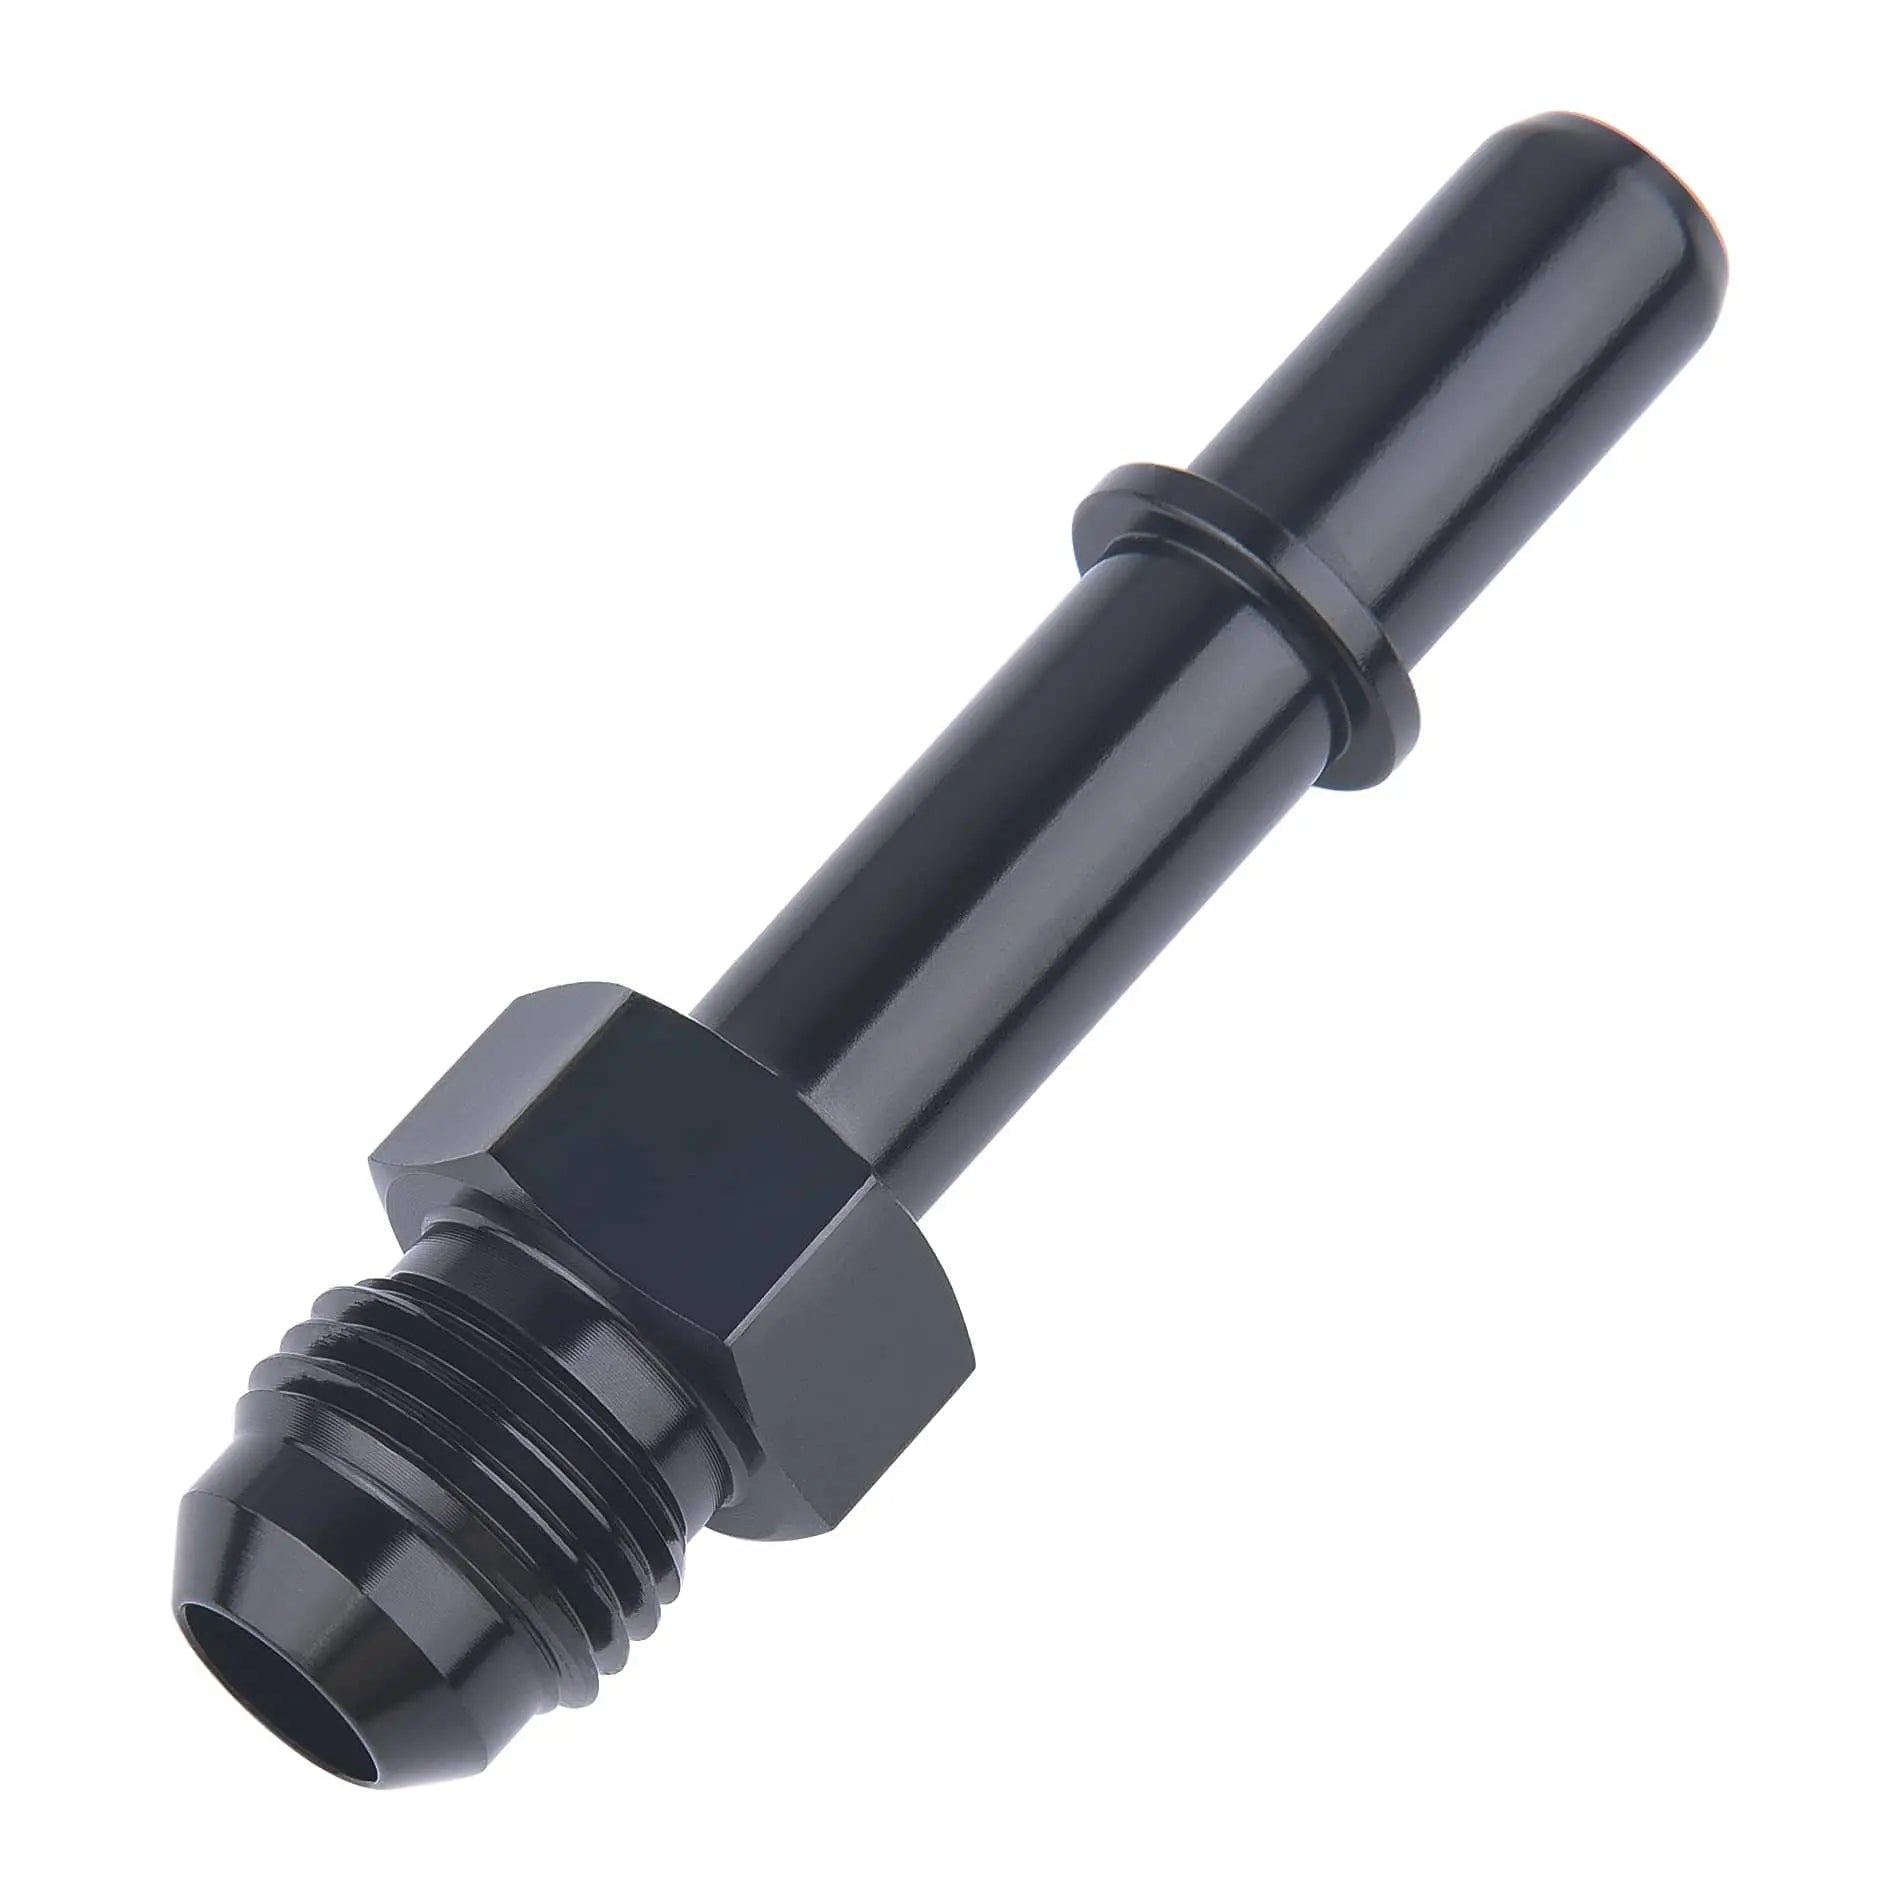 6AN to 3/8 Quick Connect Fitting Adapter for Hardline